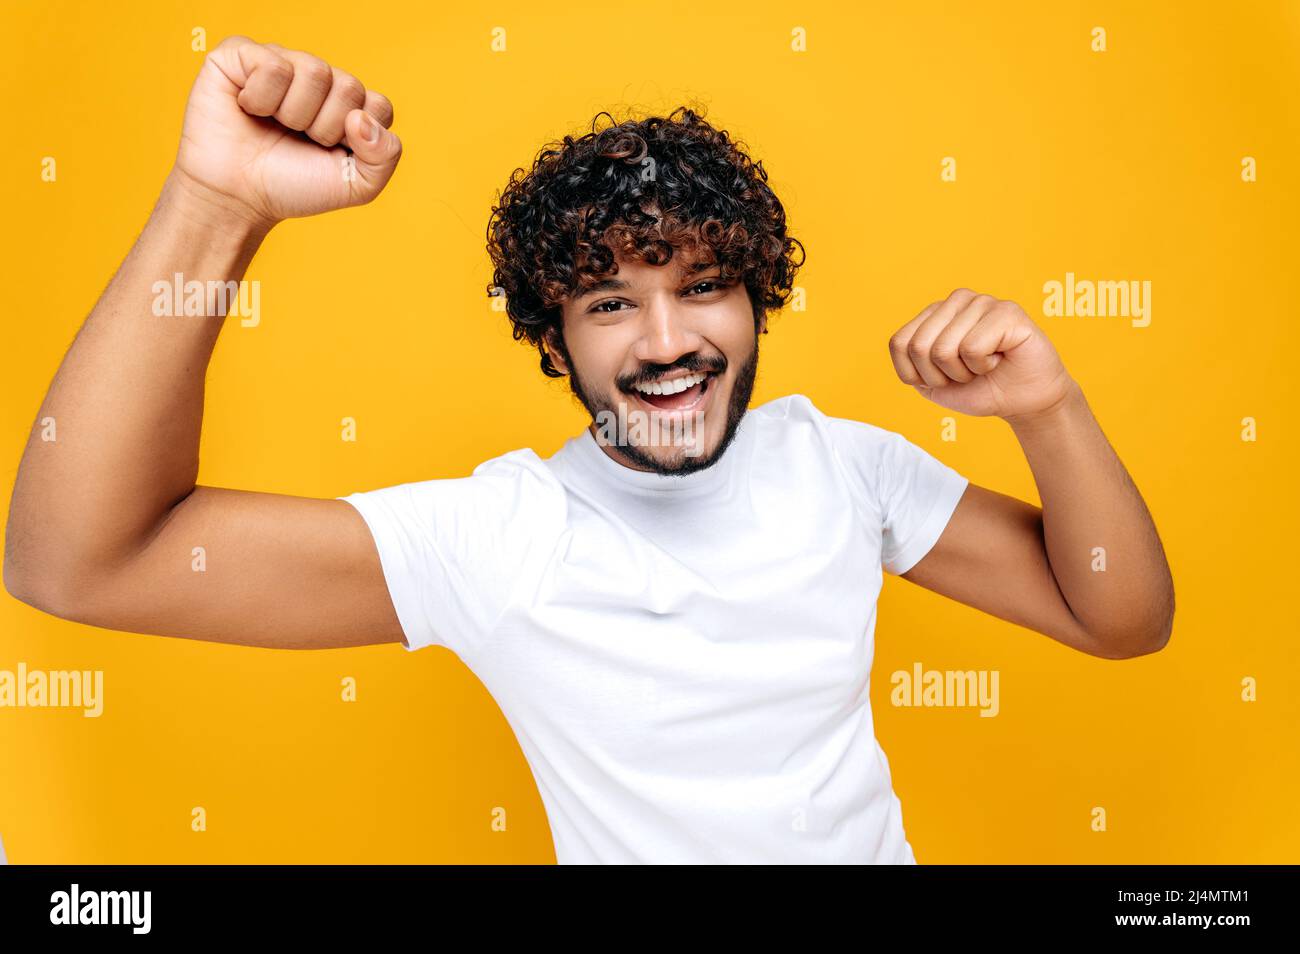 Joyful positive indian or arabian guy with curly hair, wearing white t-shirt, looks at camera happily, spreading his arms to the sides, standing over isolated orange background, looks at camera, smile Stock Photo